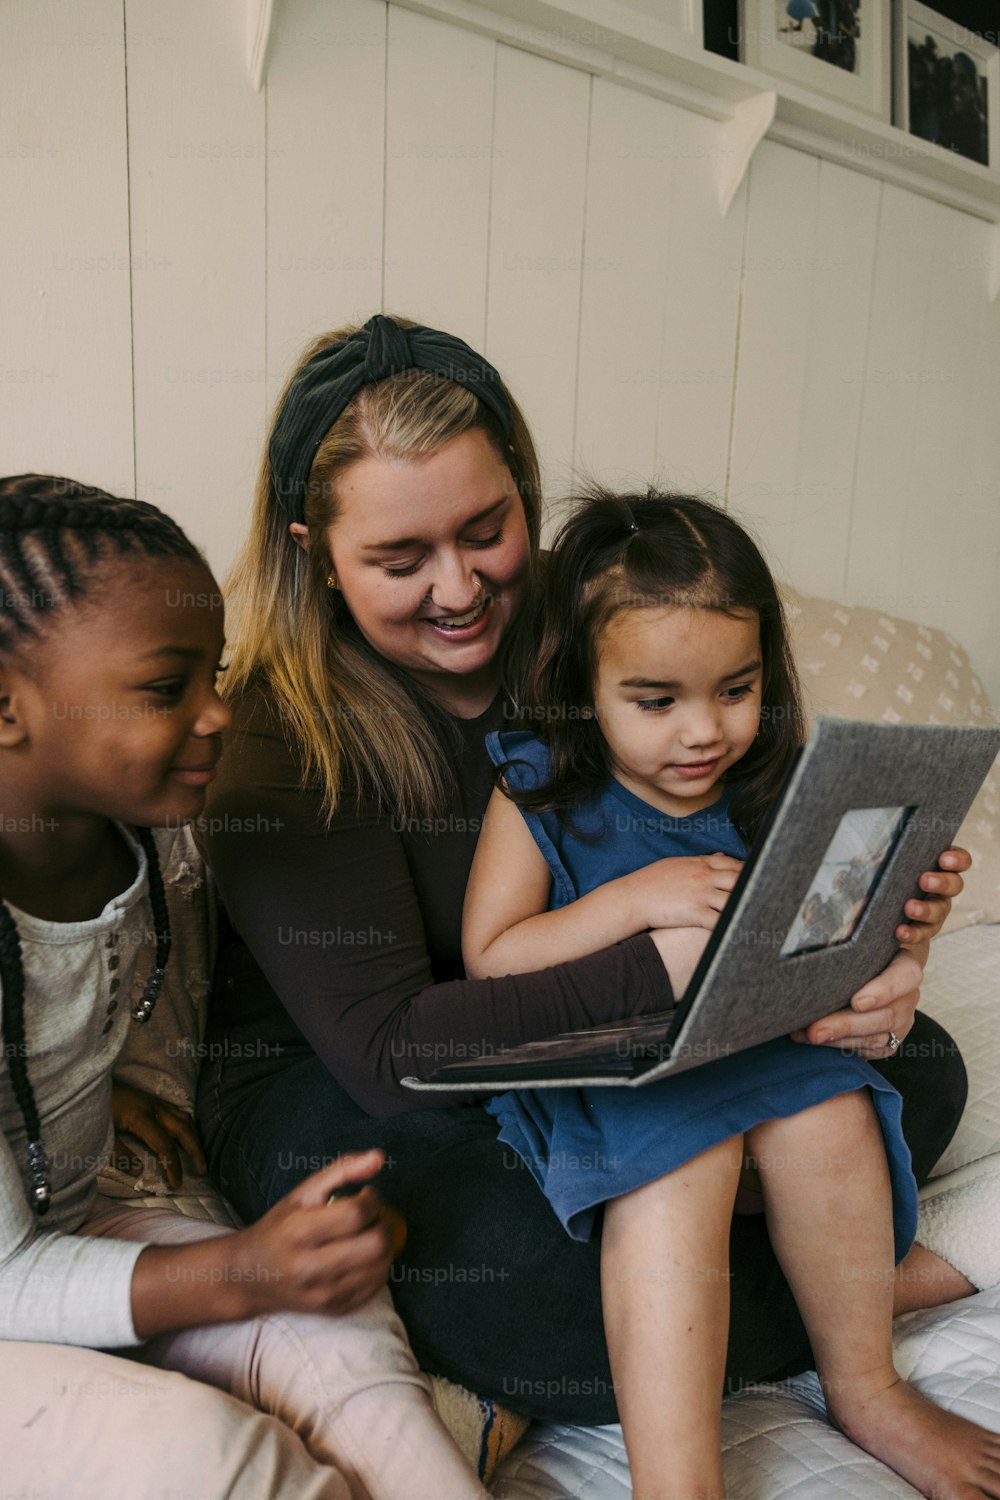 a woman and two children sitting on a bed looking at a laptop